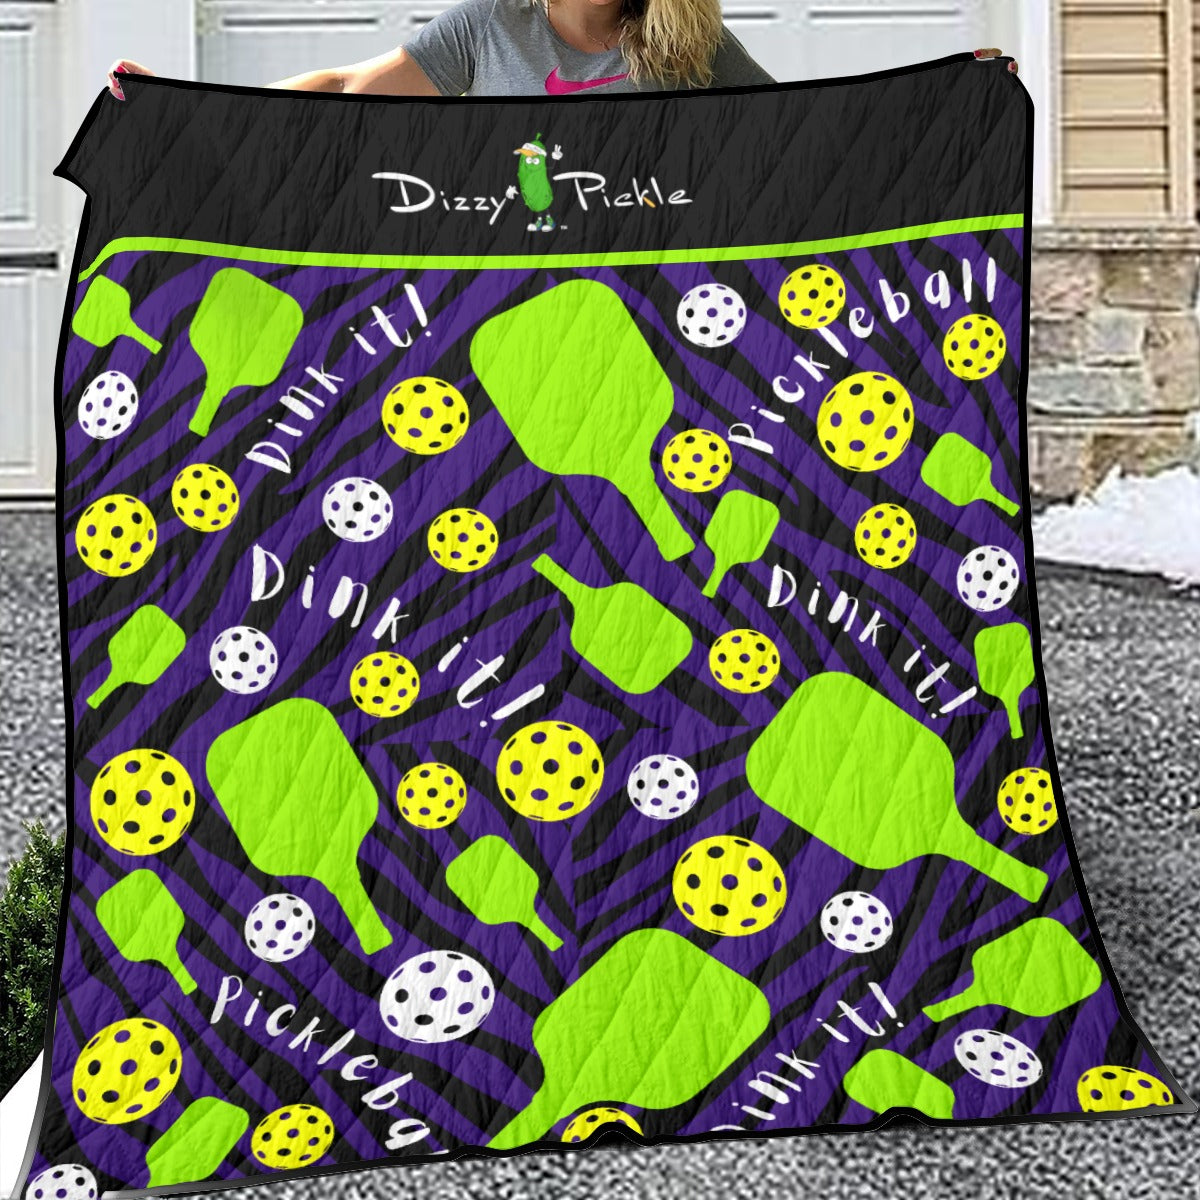 Dinking Diva - Black - Large - Lightweight Quilt by Dizzy Pickle